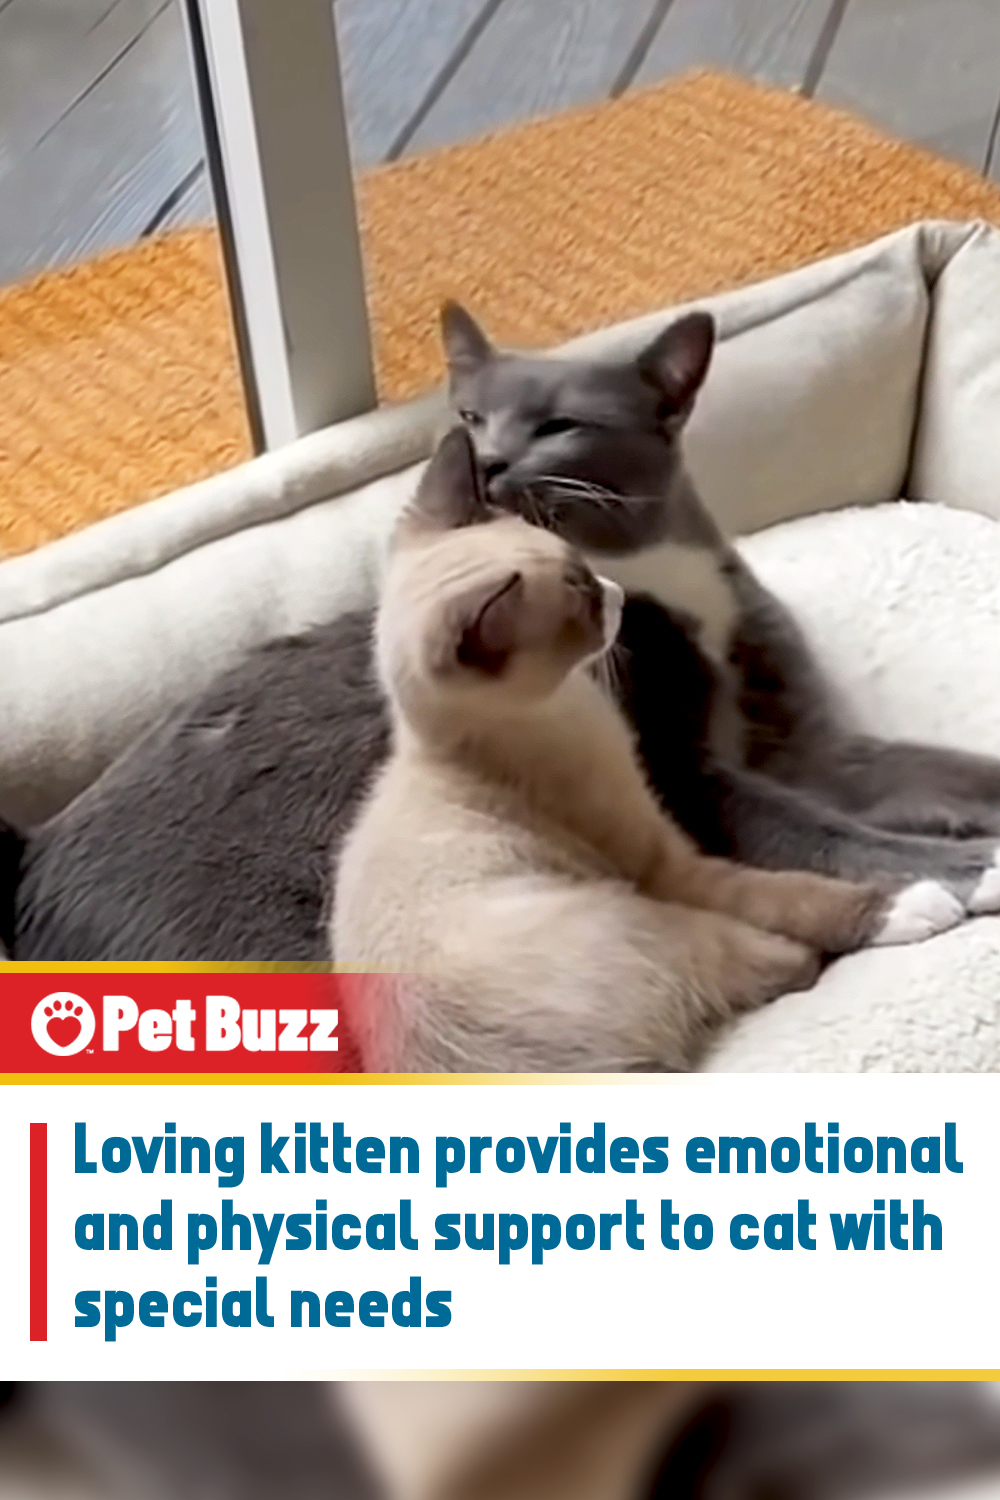 Loving kitten provides emotional and physical support to cat with special needs